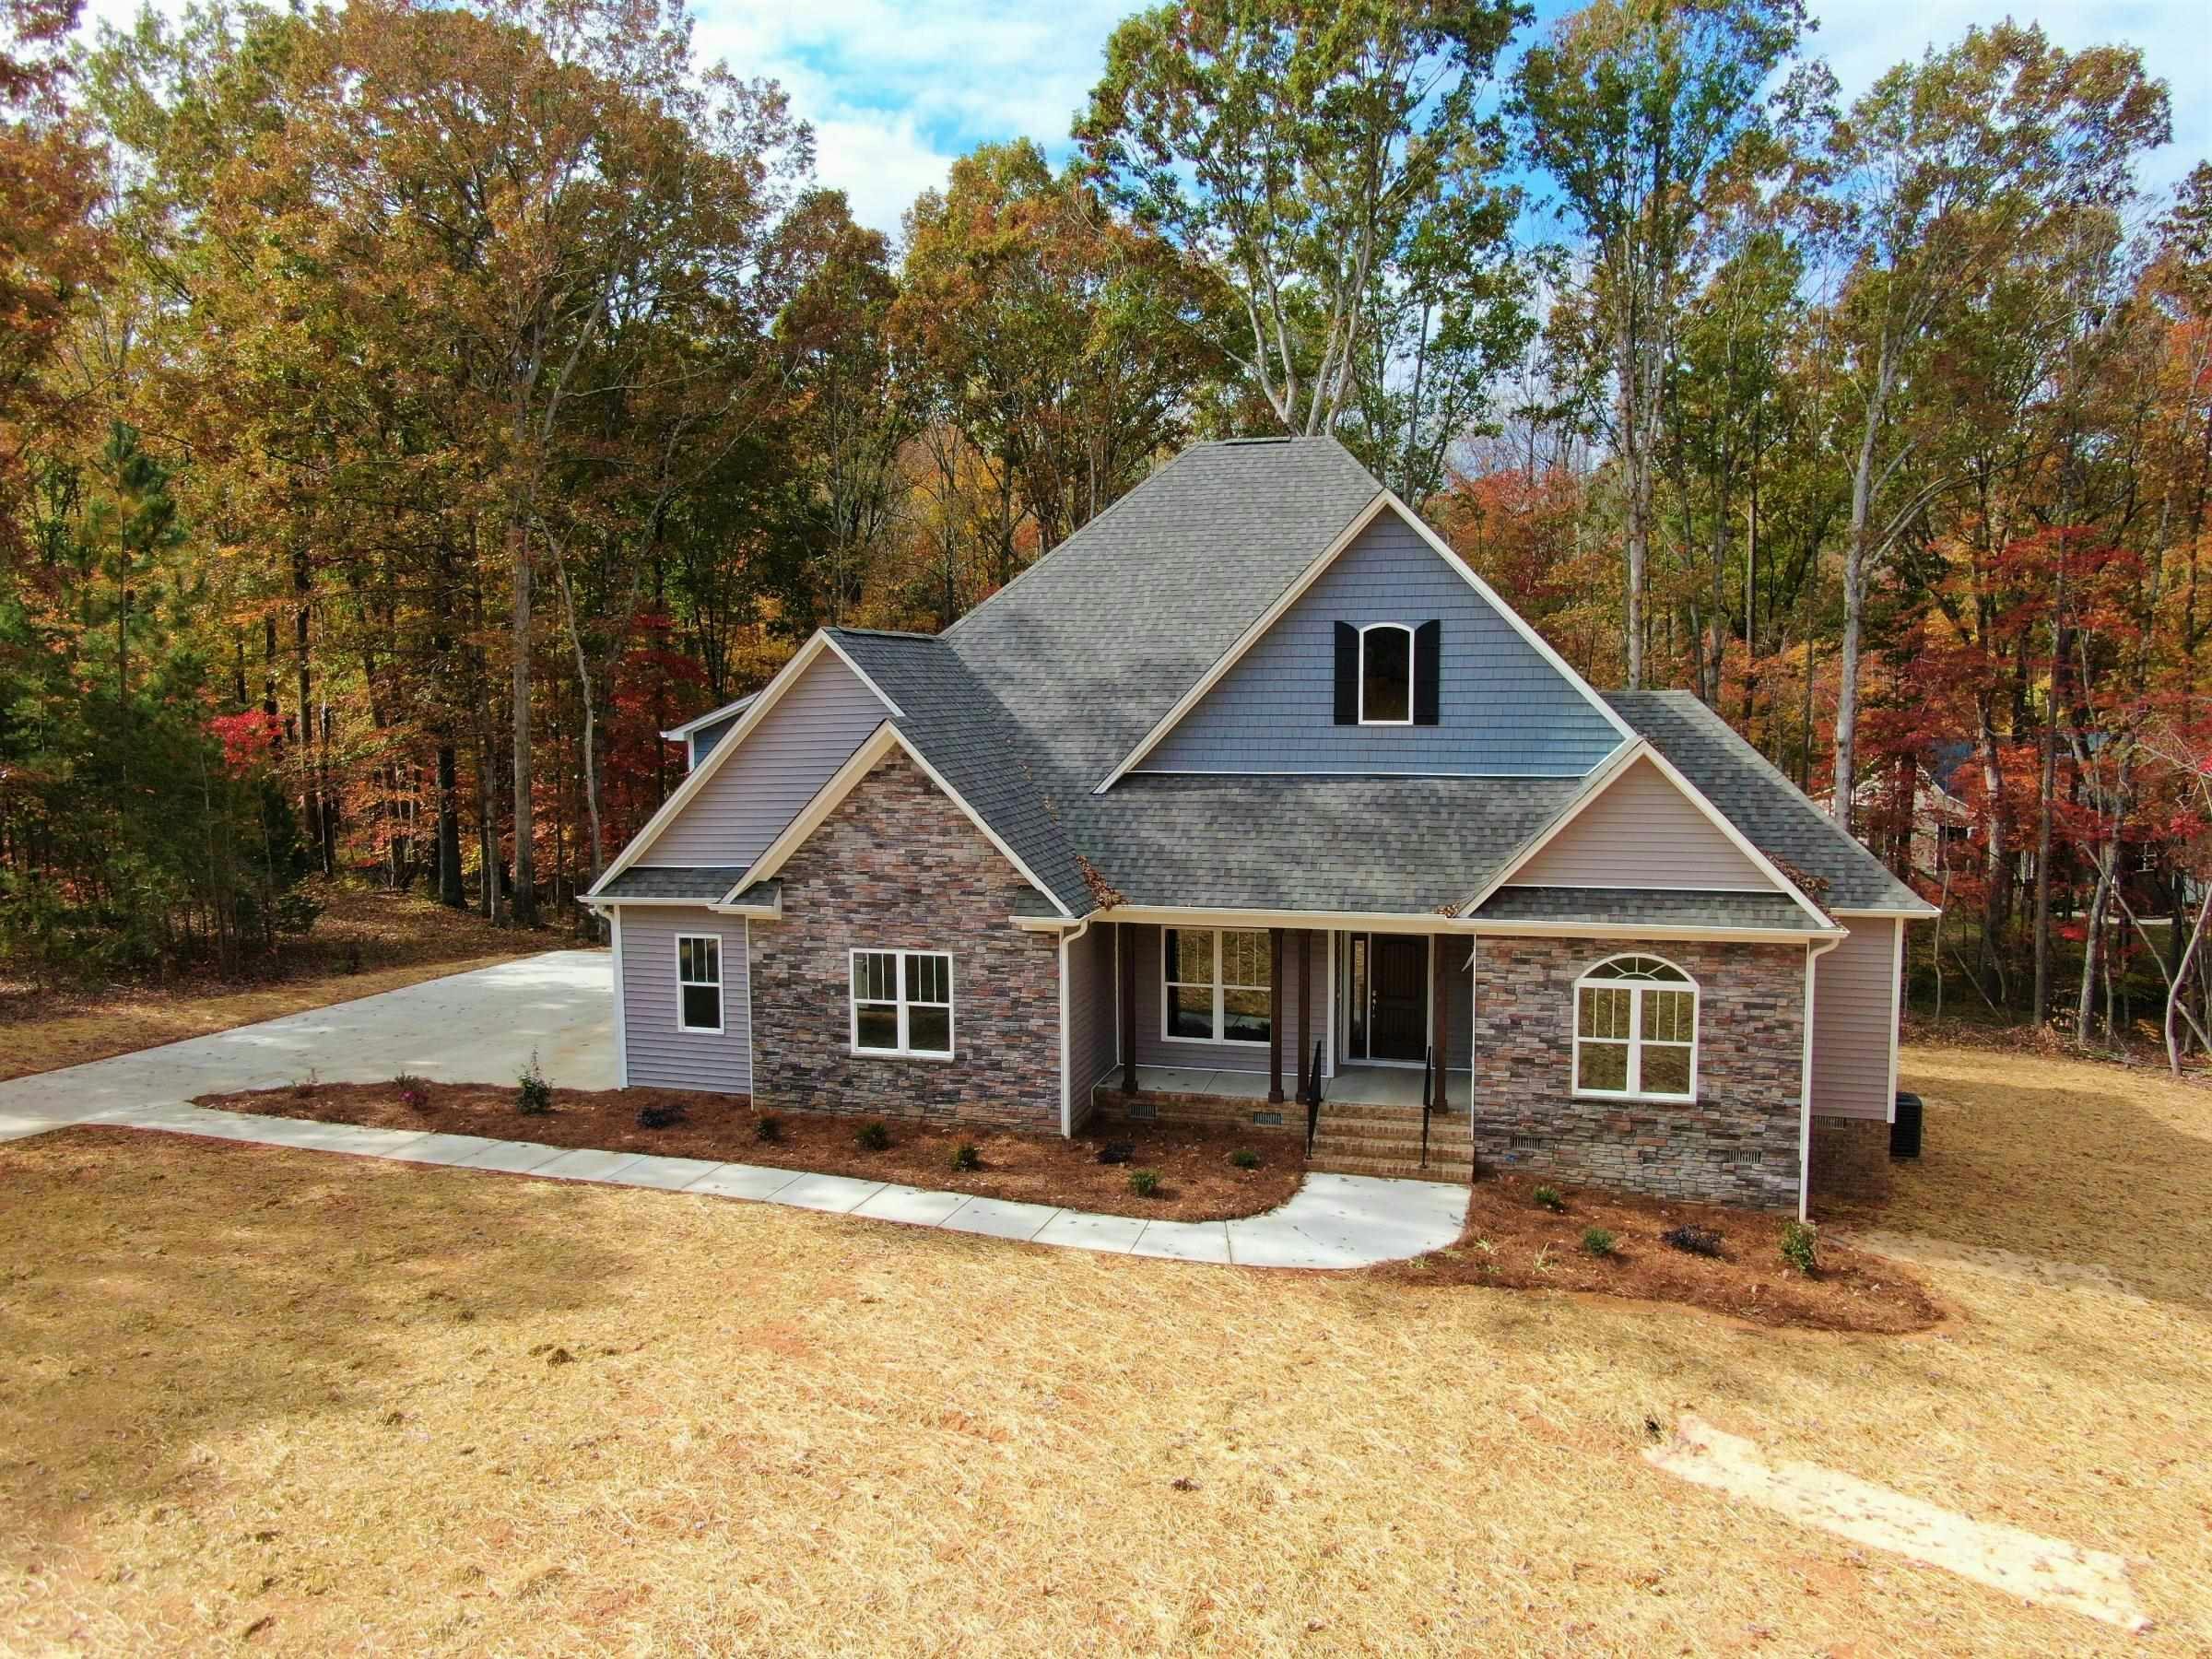 STUNNING new construction on 1.23 acres!